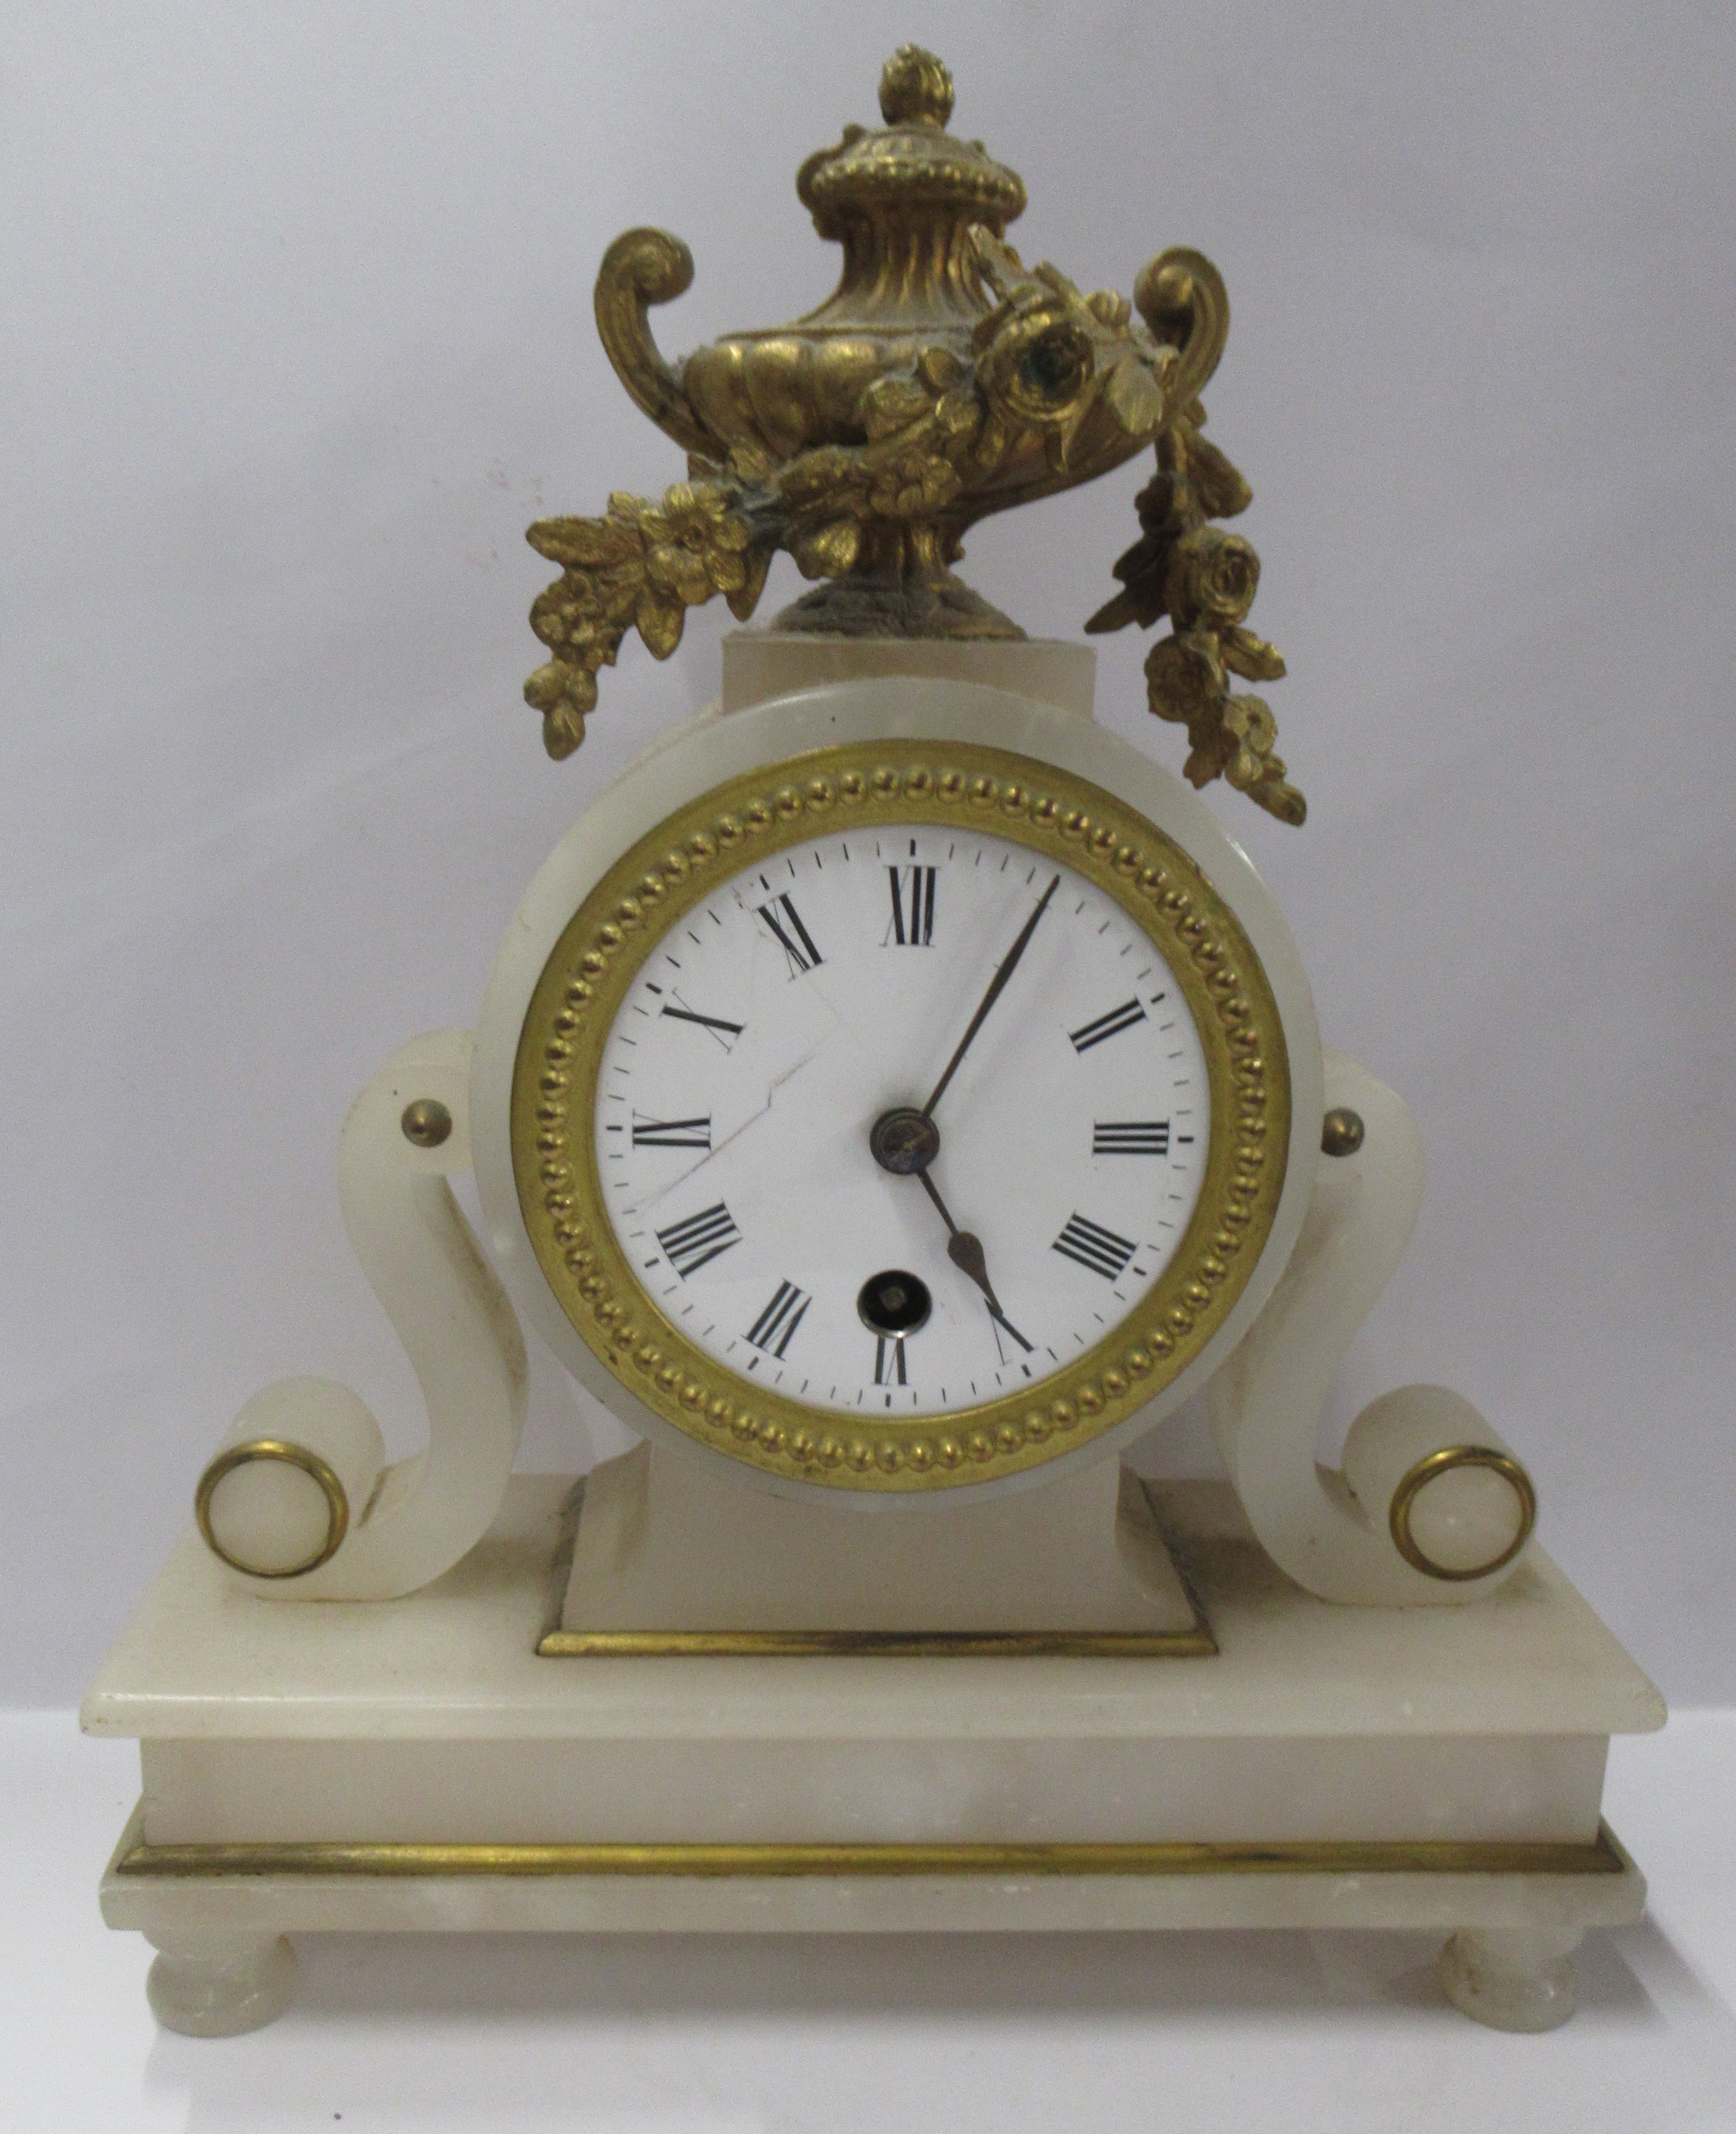 A 19th century marble cased mantel clock, with gilt metal urn and swag decoration, height 10.5ins